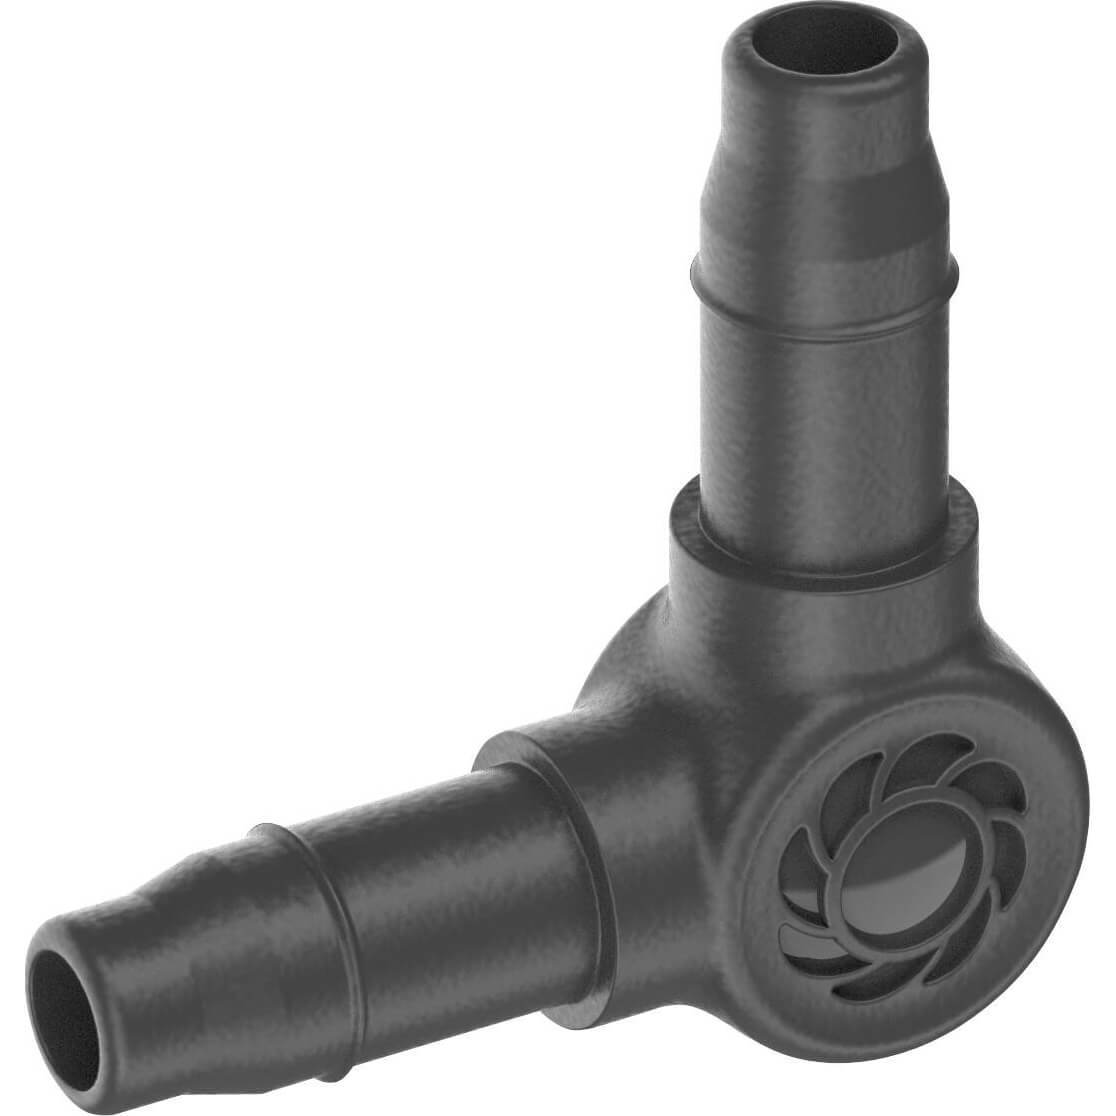 Image of Gardena MICRO DRIP L Joint Pipe Connector (New) 3/16" / 4.6mm Pack of 10